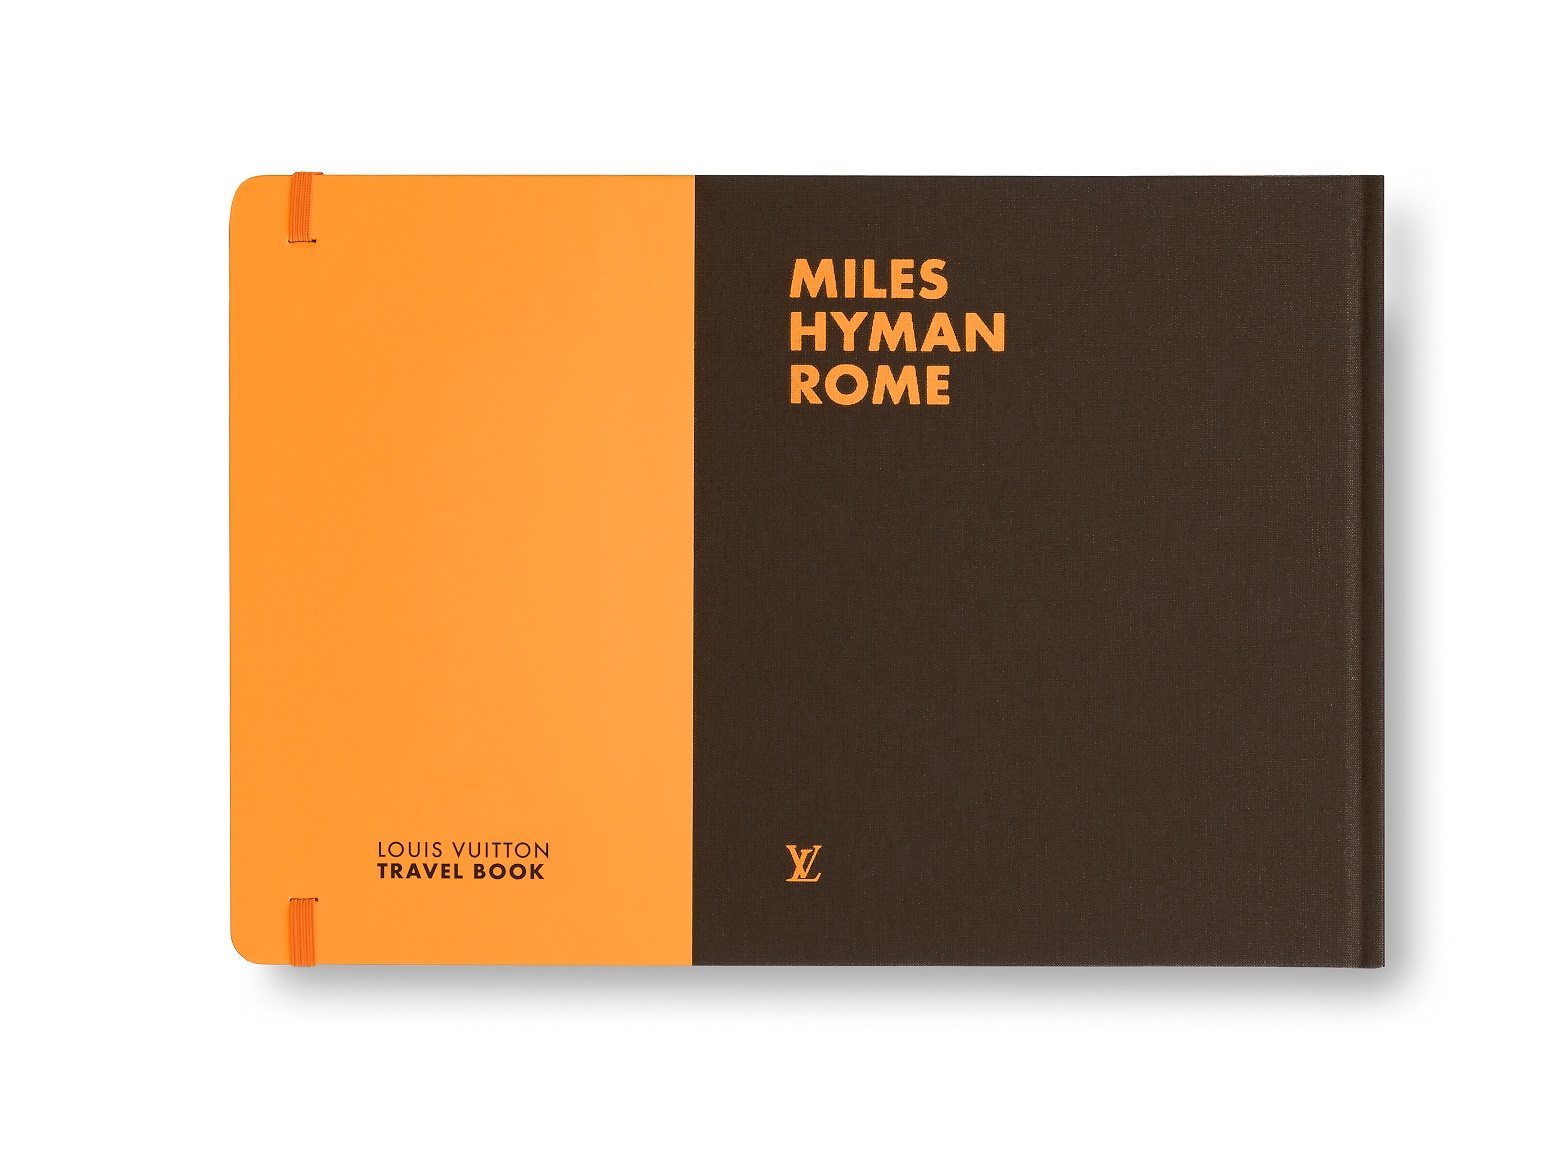 Louis Vuitton Travel Book | Rome by Miles Hyman | foto | mostra |Globestyles